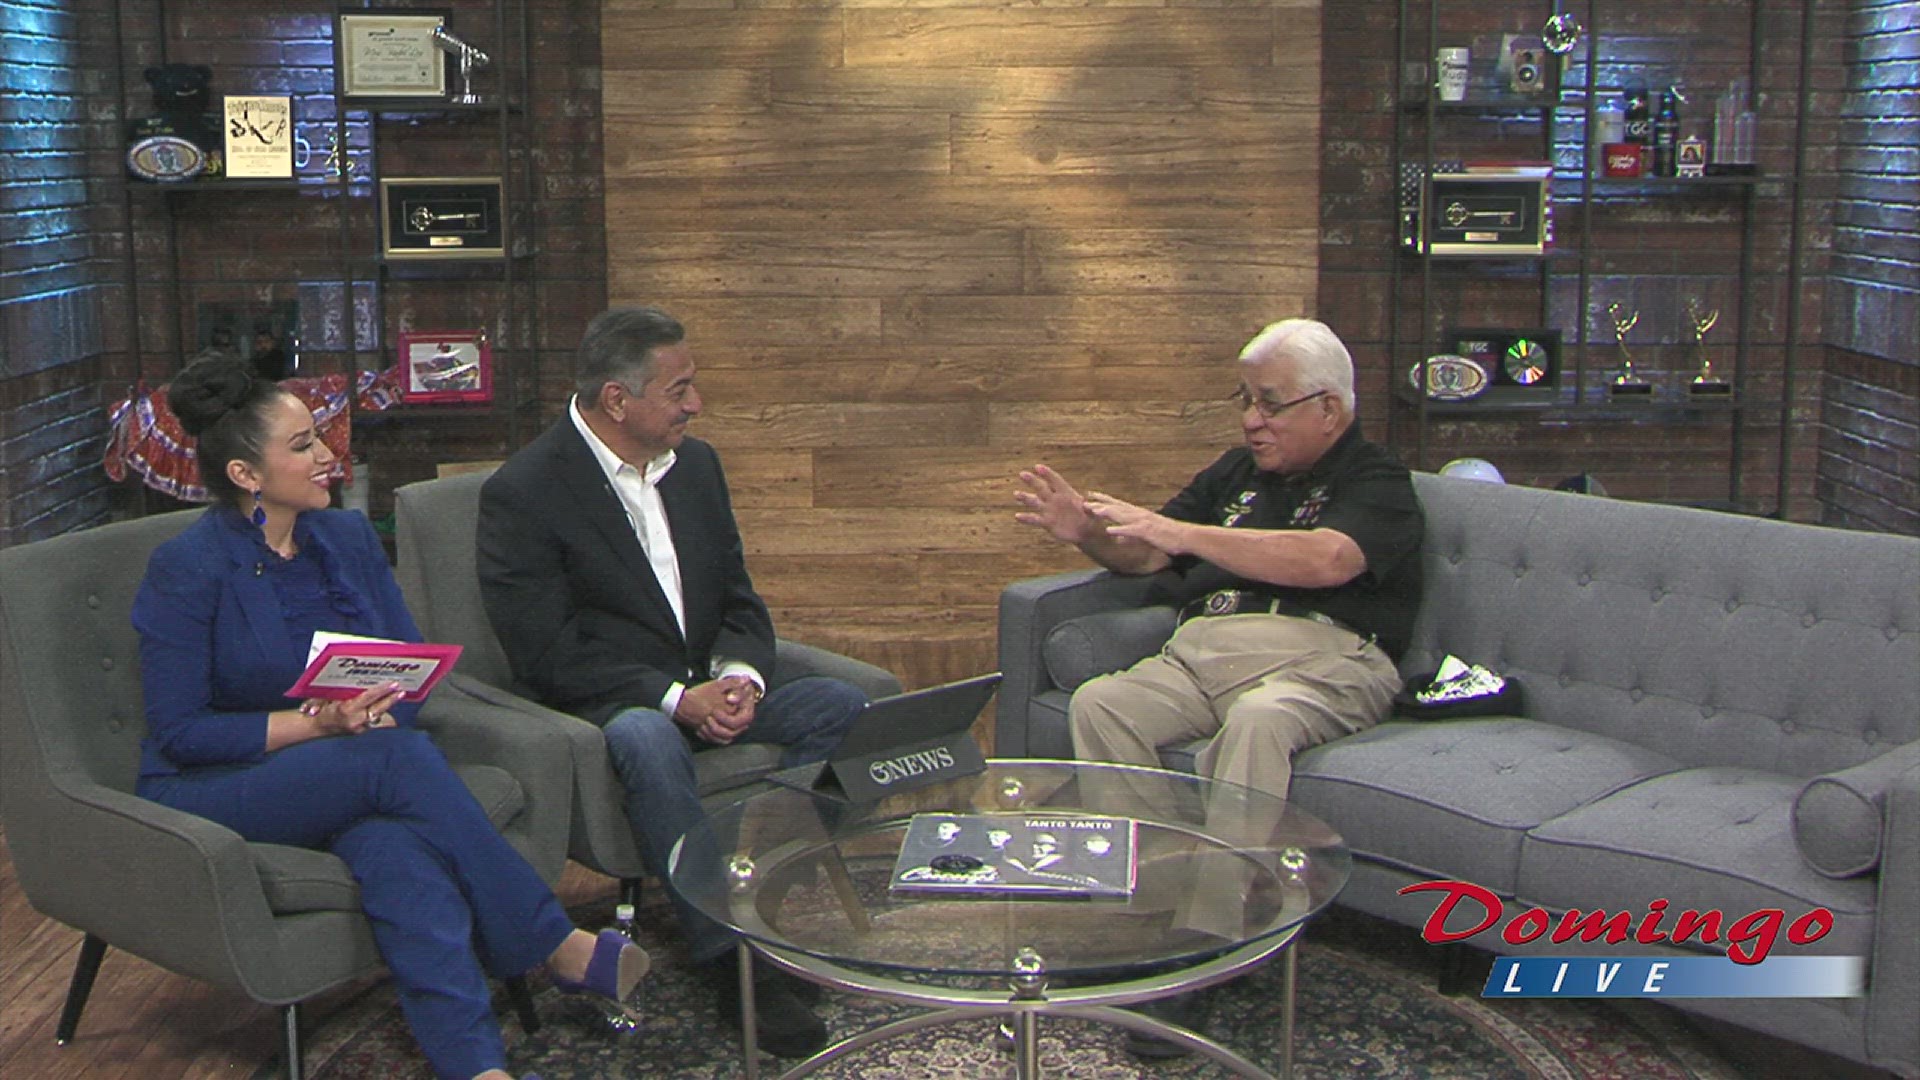 Vietnam veteran and founder of the Corpus Christi Veterans' Band Ram Chavez joined us on Domingo Live to discuss Memorial Day, his war days and how music saved him.